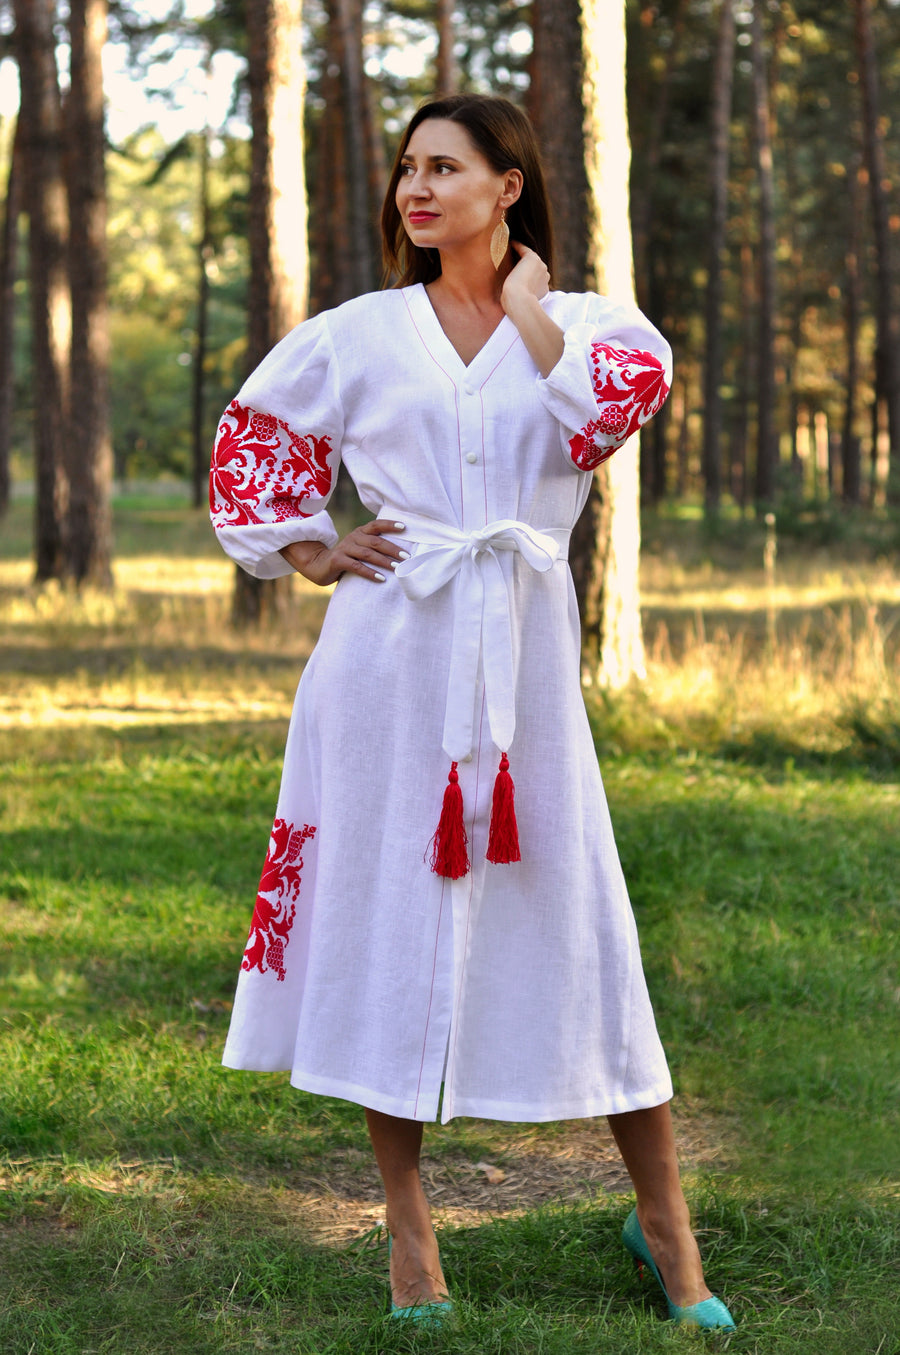 Robe dress made of natural white linen with red embroidery